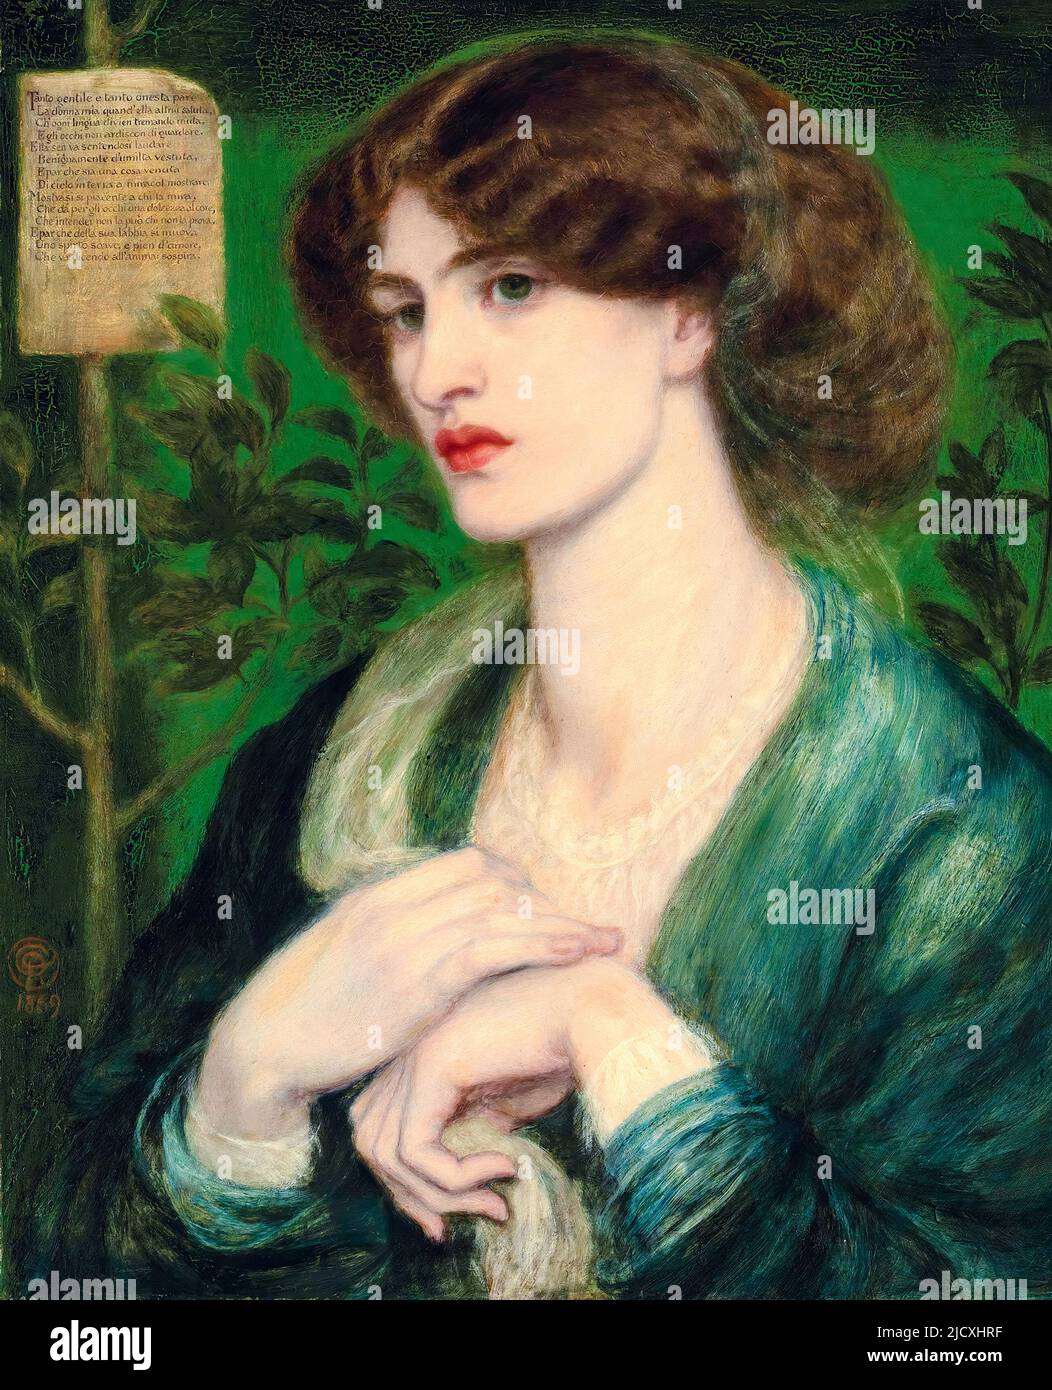 Dante Gabriel Rossetti, The Salutation of Beatrice, painting in oil on canvas, 1869 Stock Photo